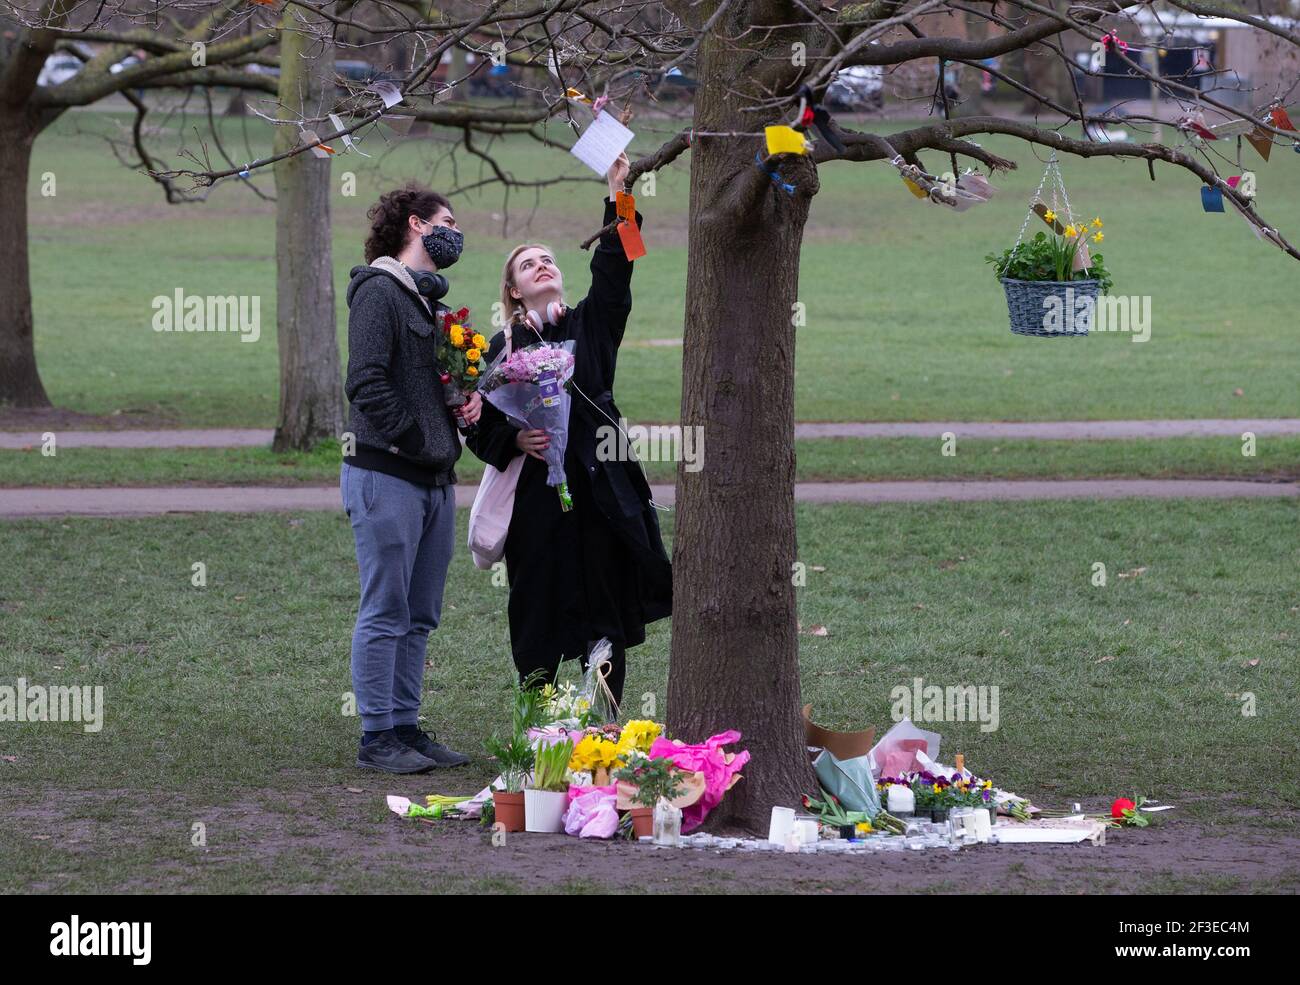 London, UK. 16th Mar, 2021. People read tributes to Sarah Everard tied to the branches of a tree on Clapham Common. People continue to leave tributes and flowers for Sarah Everard at the bandstand on Clapham Common which has become a shrine. Sarah was last seen on March 3rd. Her body was found in a builders' bag in Woodland at Ashord. PC Wayne Couzens appeared at the Old Bailey via videolink from Belmarsh prison today. He will go on trial in October. Credit: Mark Thomas/Alamy Live News Stock Photo